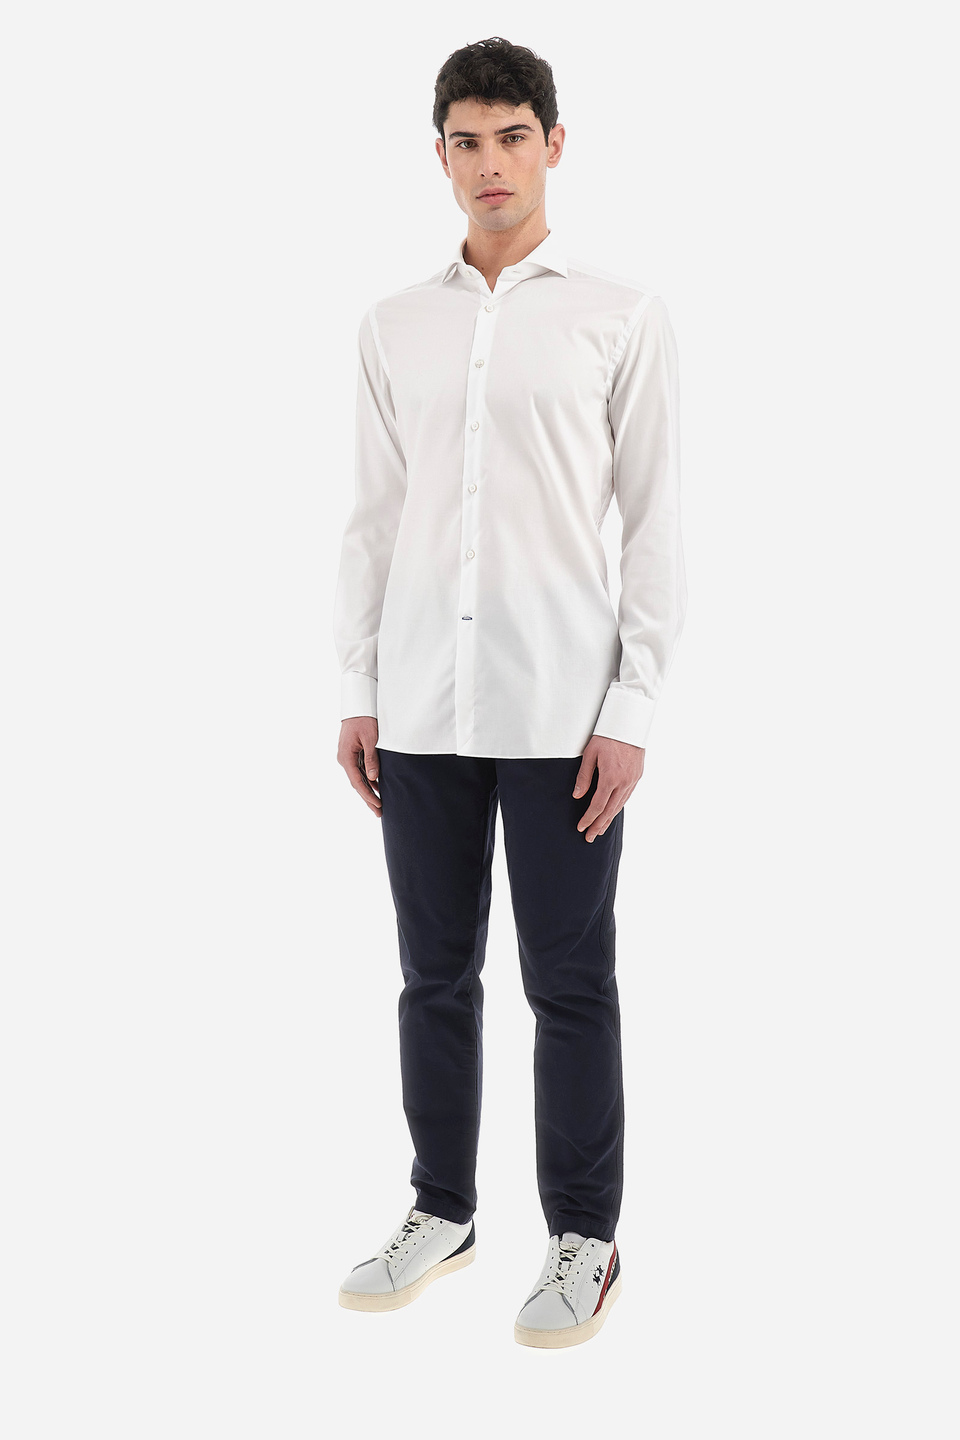 Classic style shirt for men in long-sleeved cotton - Paternò | La Martina - Official Online Shop